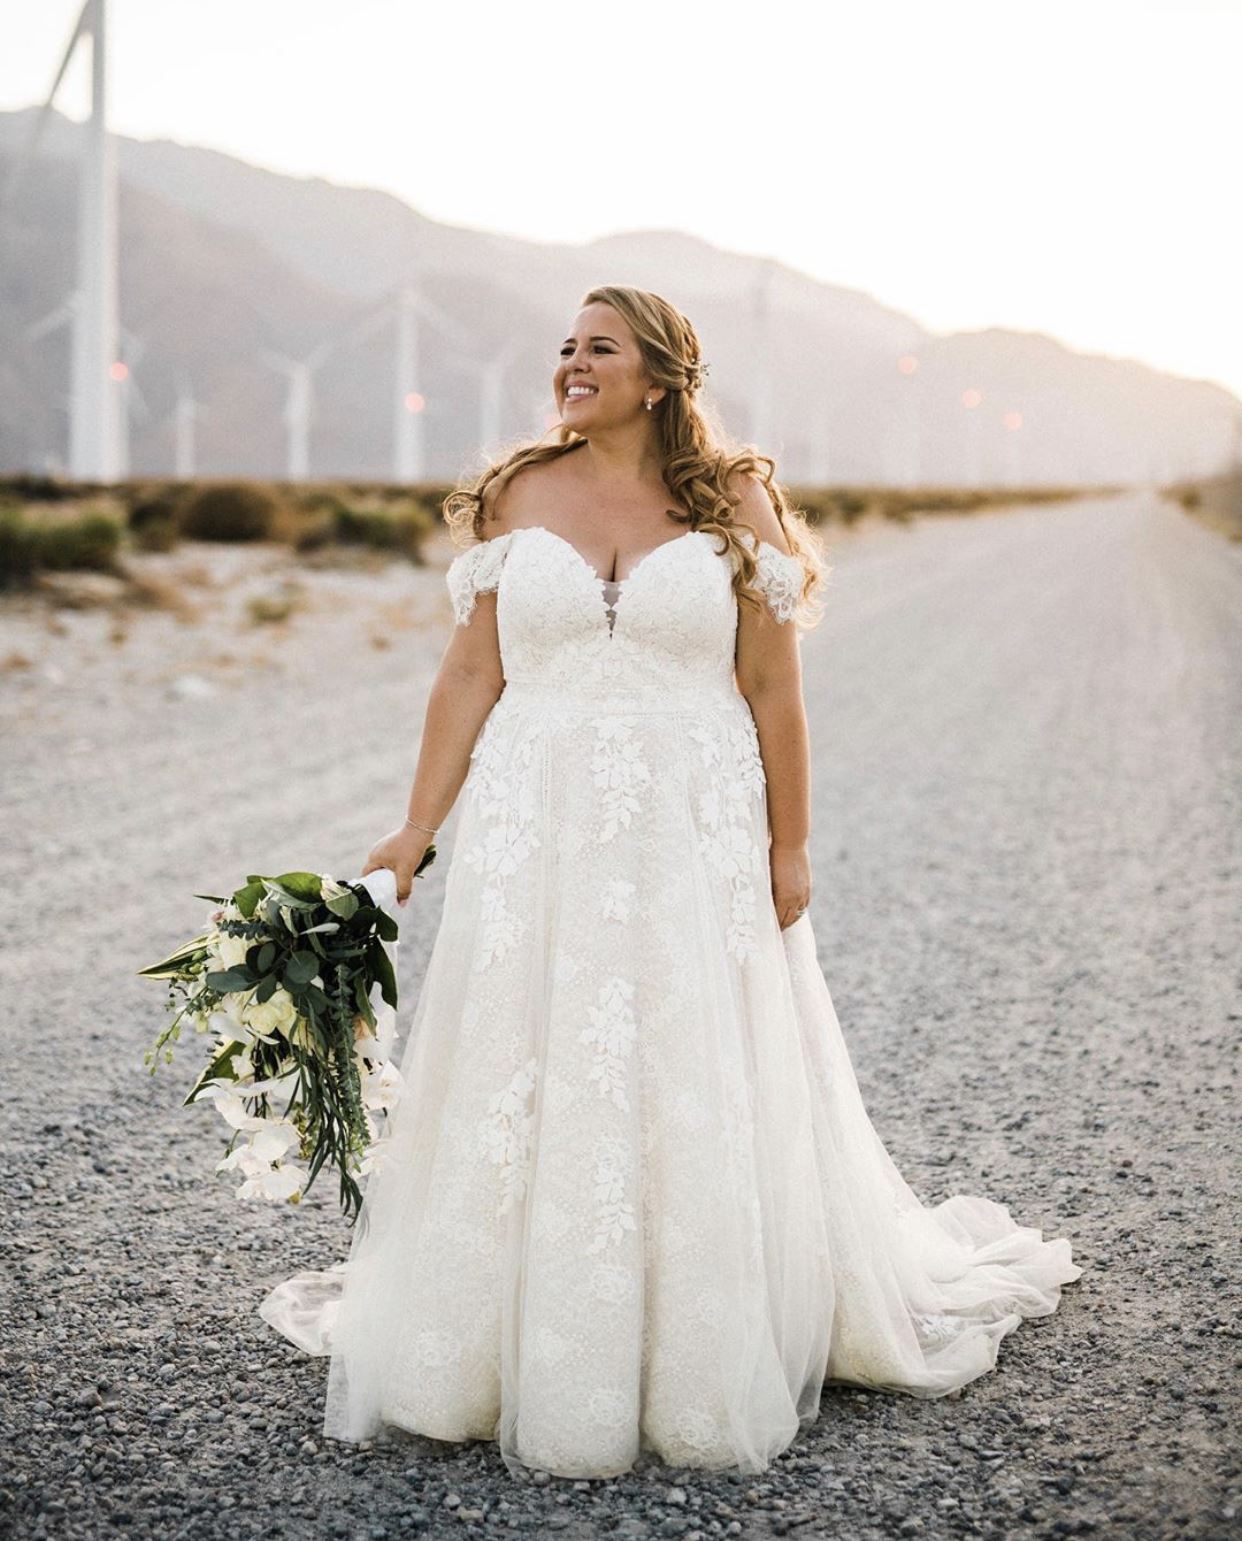 Blonde bride in white dress at country road